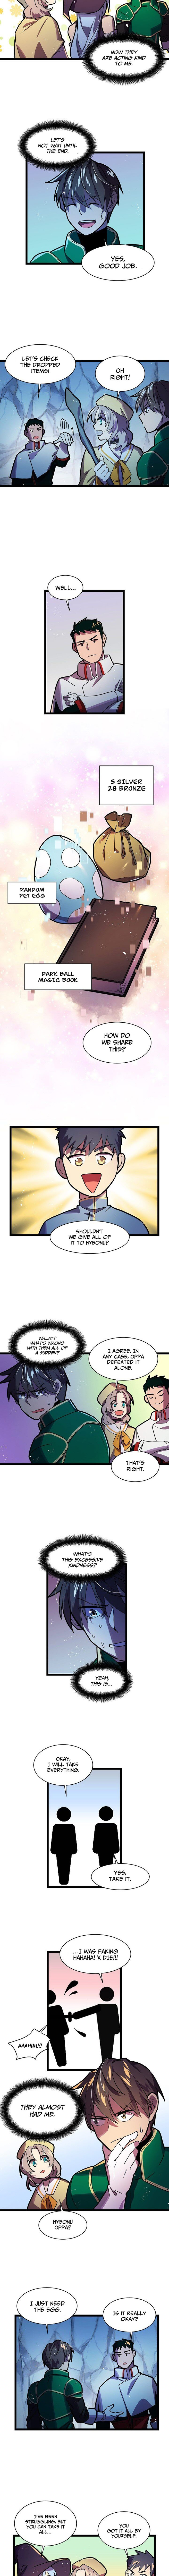 Ranker's Return - Chapter 11 Page 6